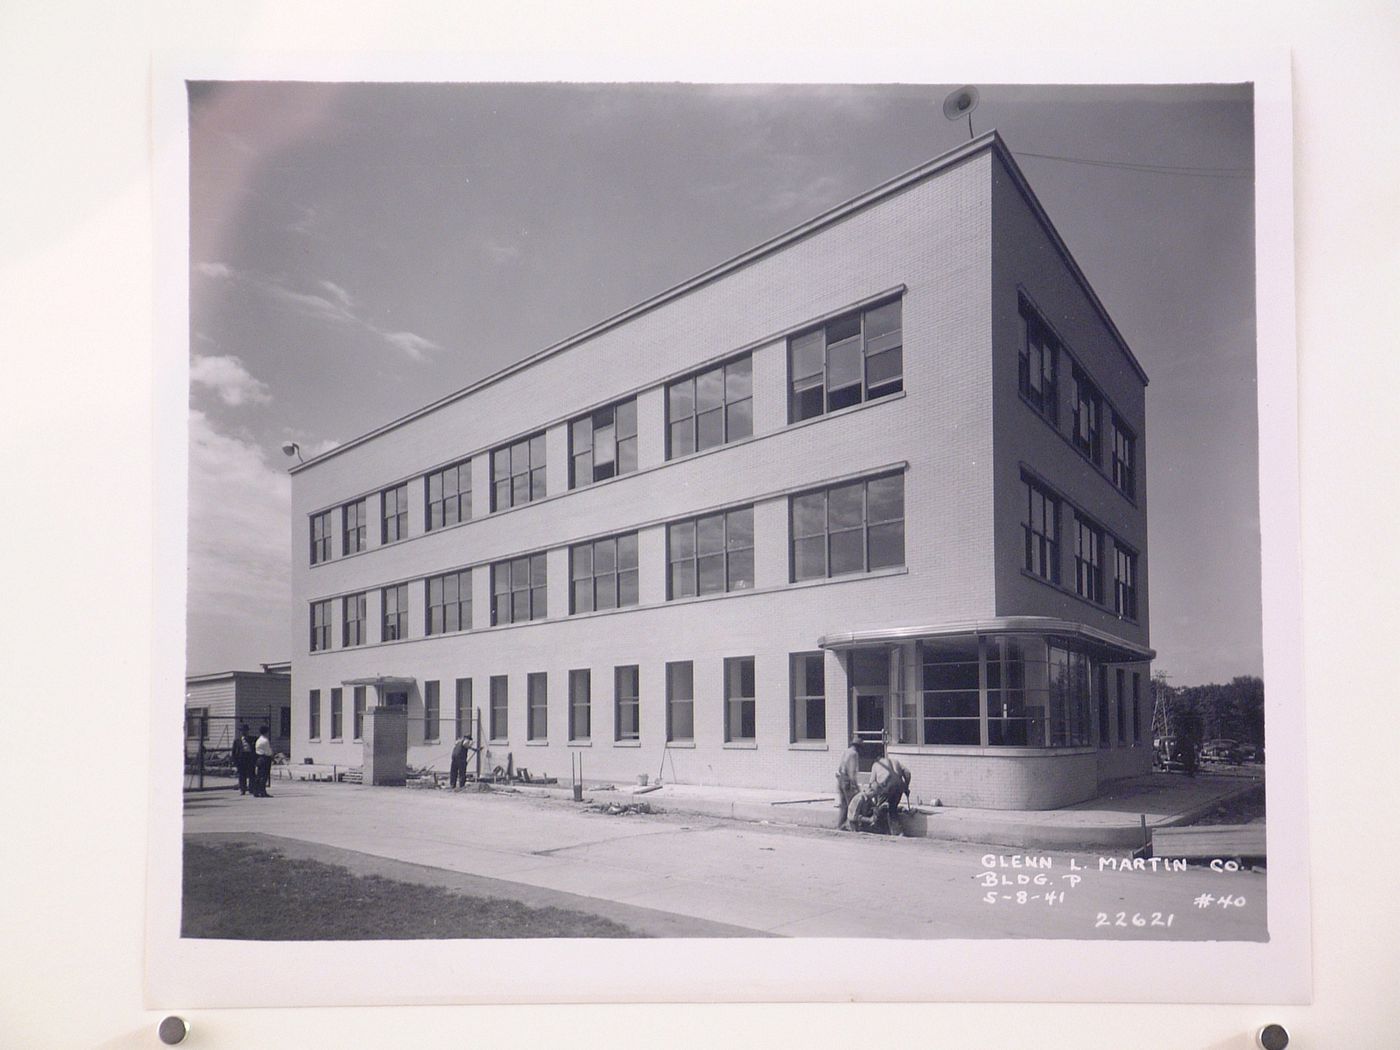 View of the principal and lateral façades of the Employment Building (also known as Building P) under construction [?], Glenn L. Martin Company Navy Assembly Plant No. 1, Middle River, Maryland